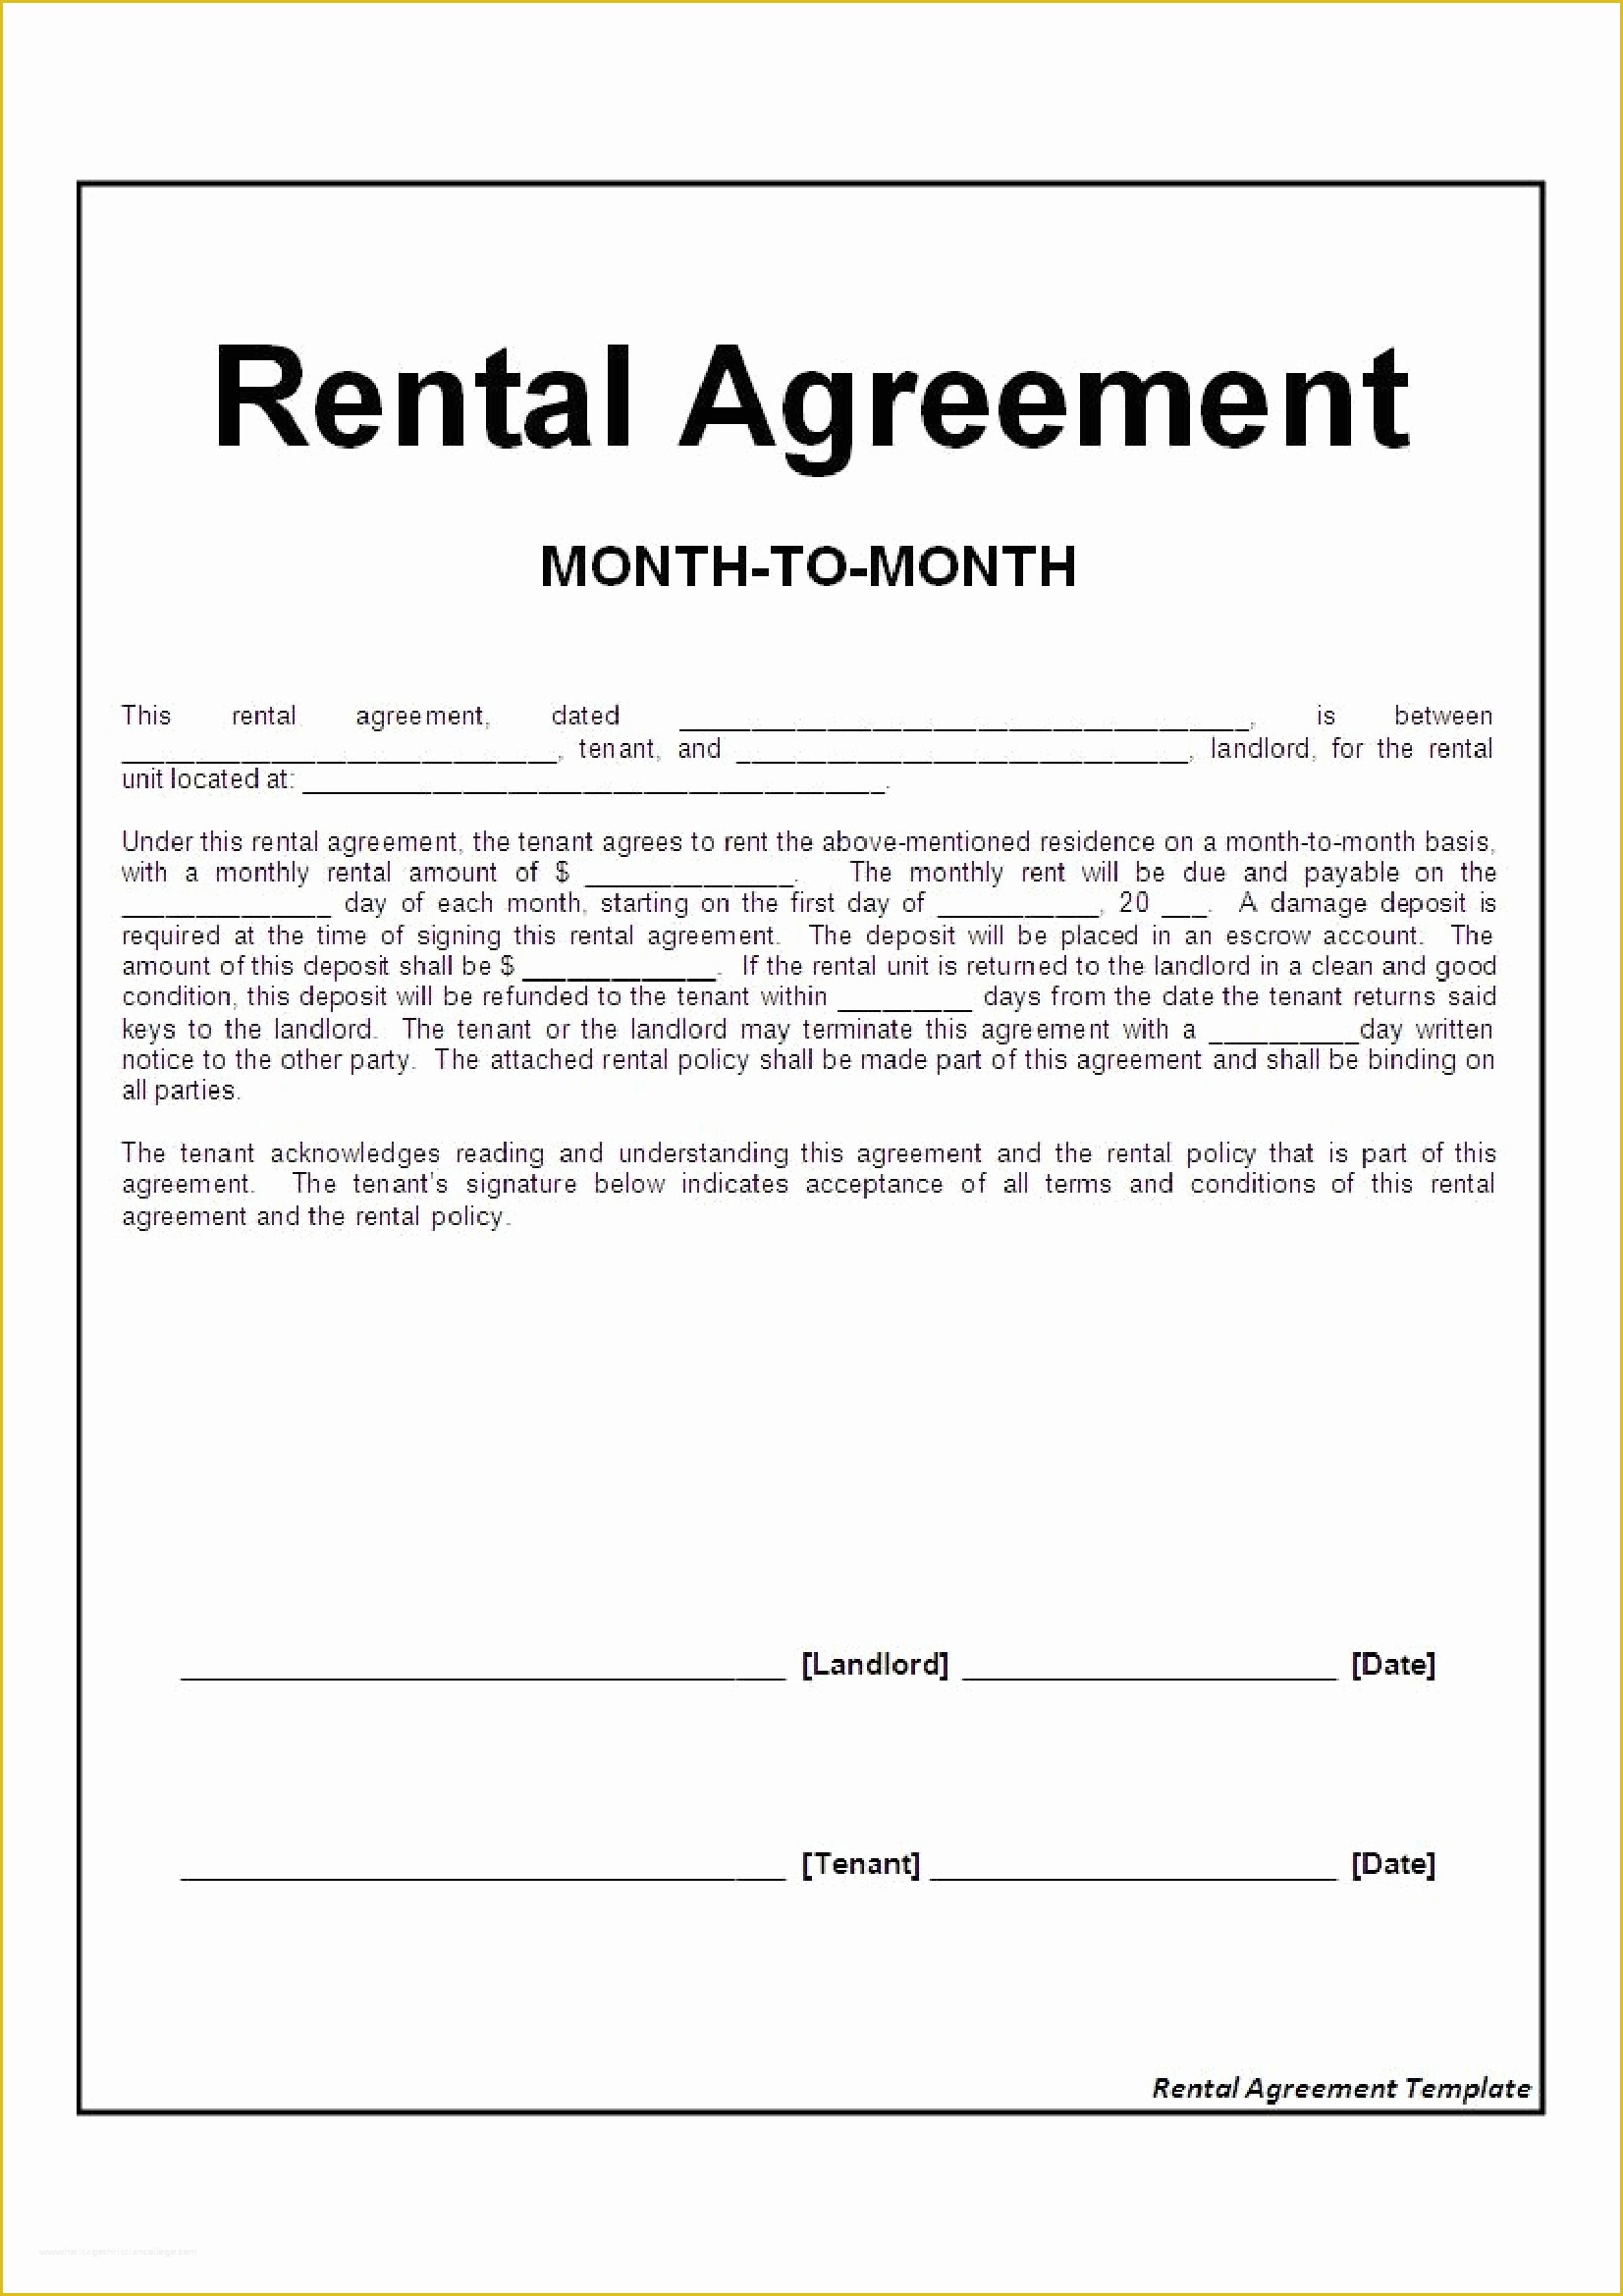 Free Tenant Lease Agreement Template Of Letter formats Download Free Business Letter Templates